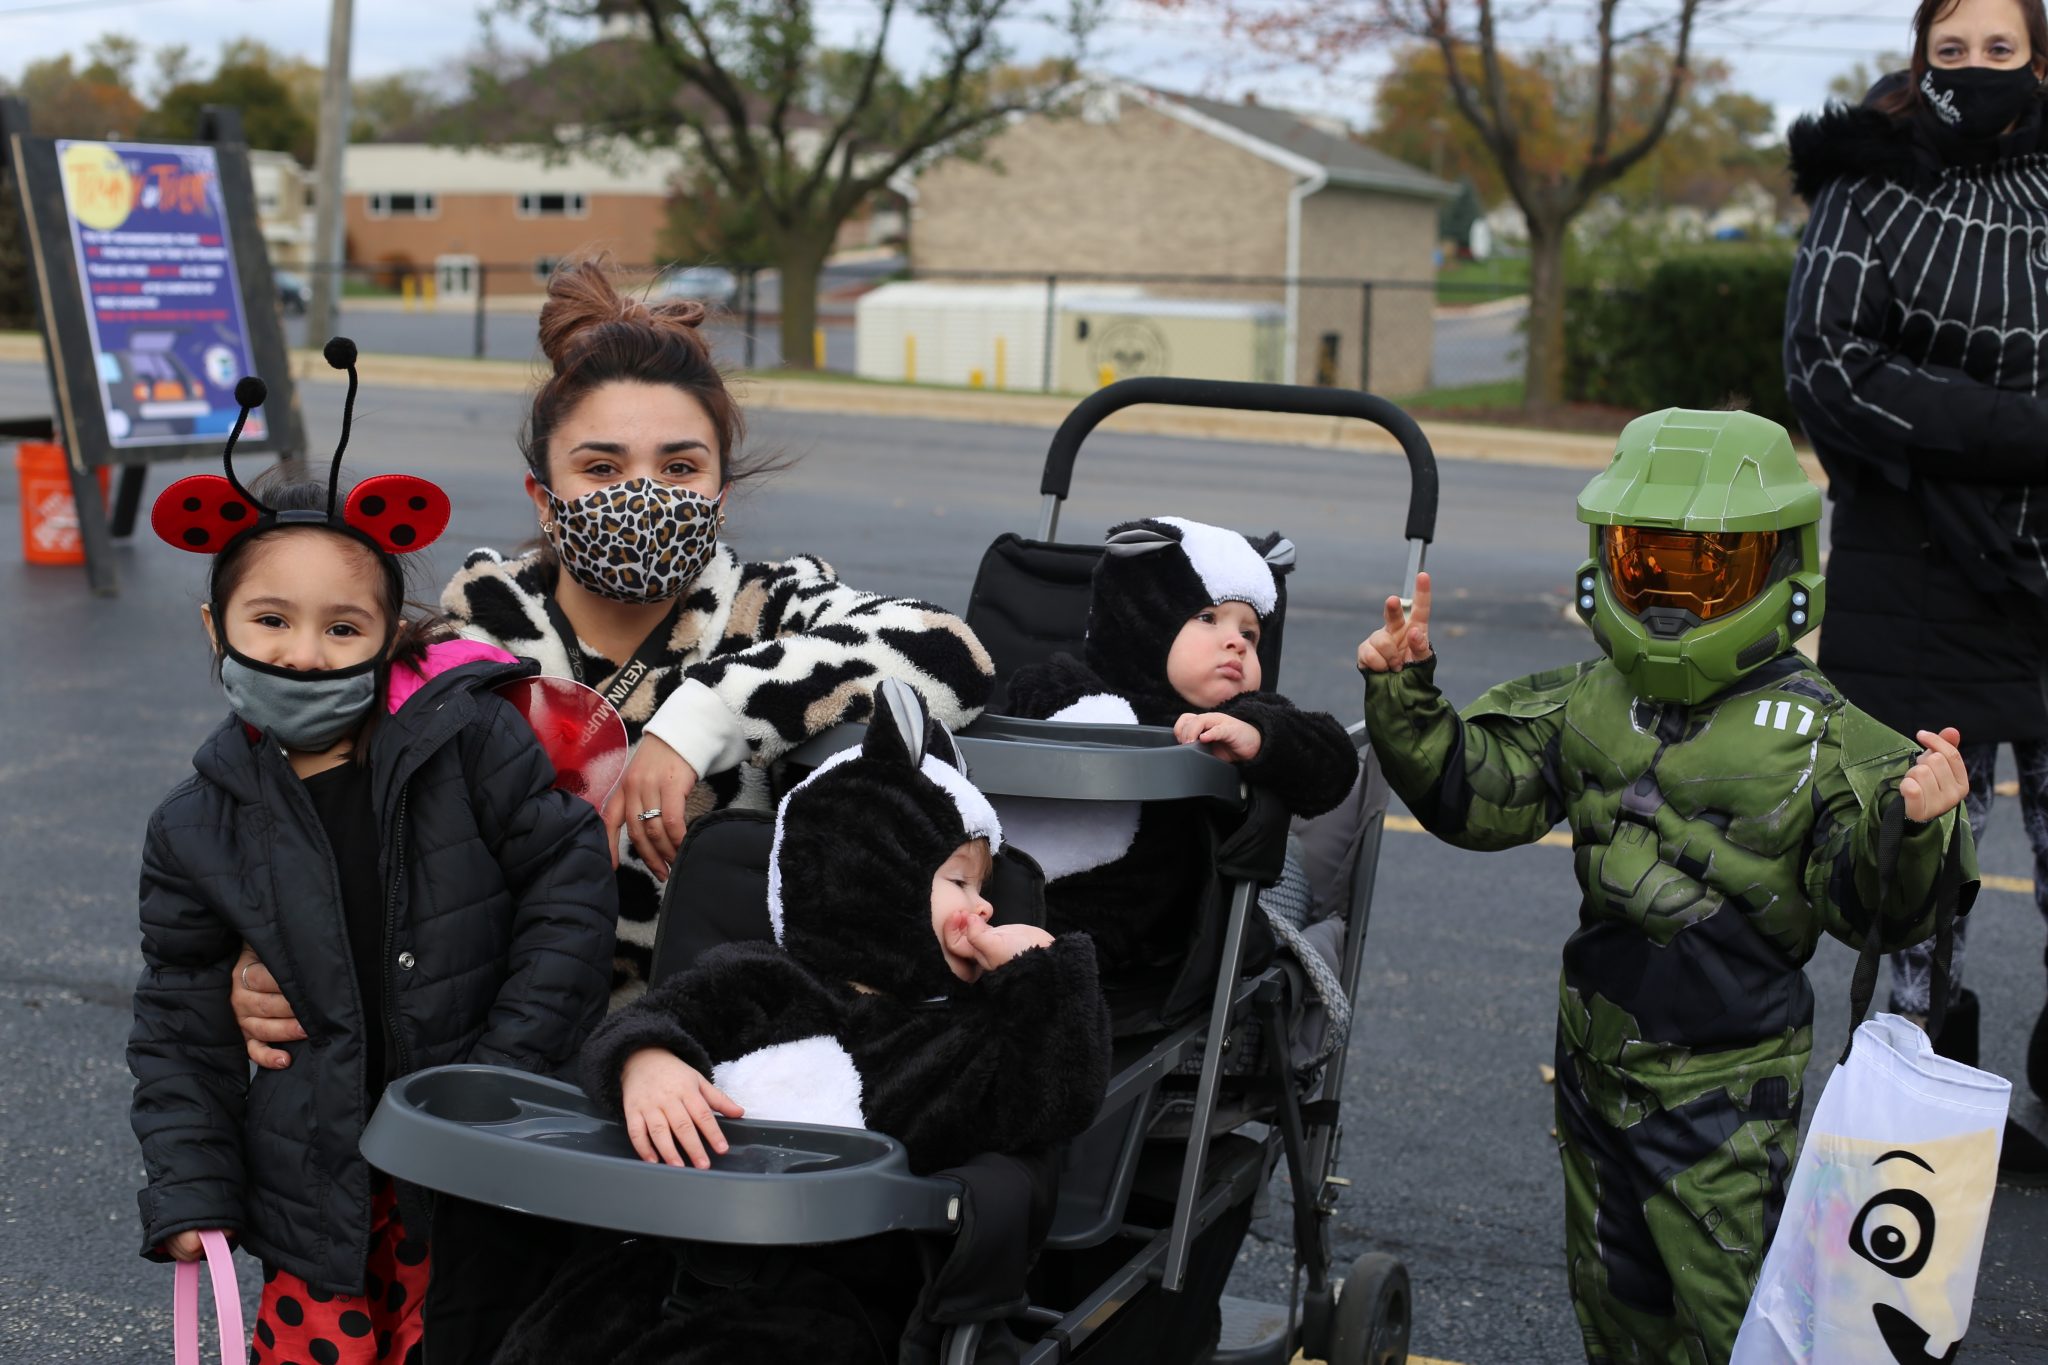 Safely TrunkorTreat Moved Indoors Streamwood Park District